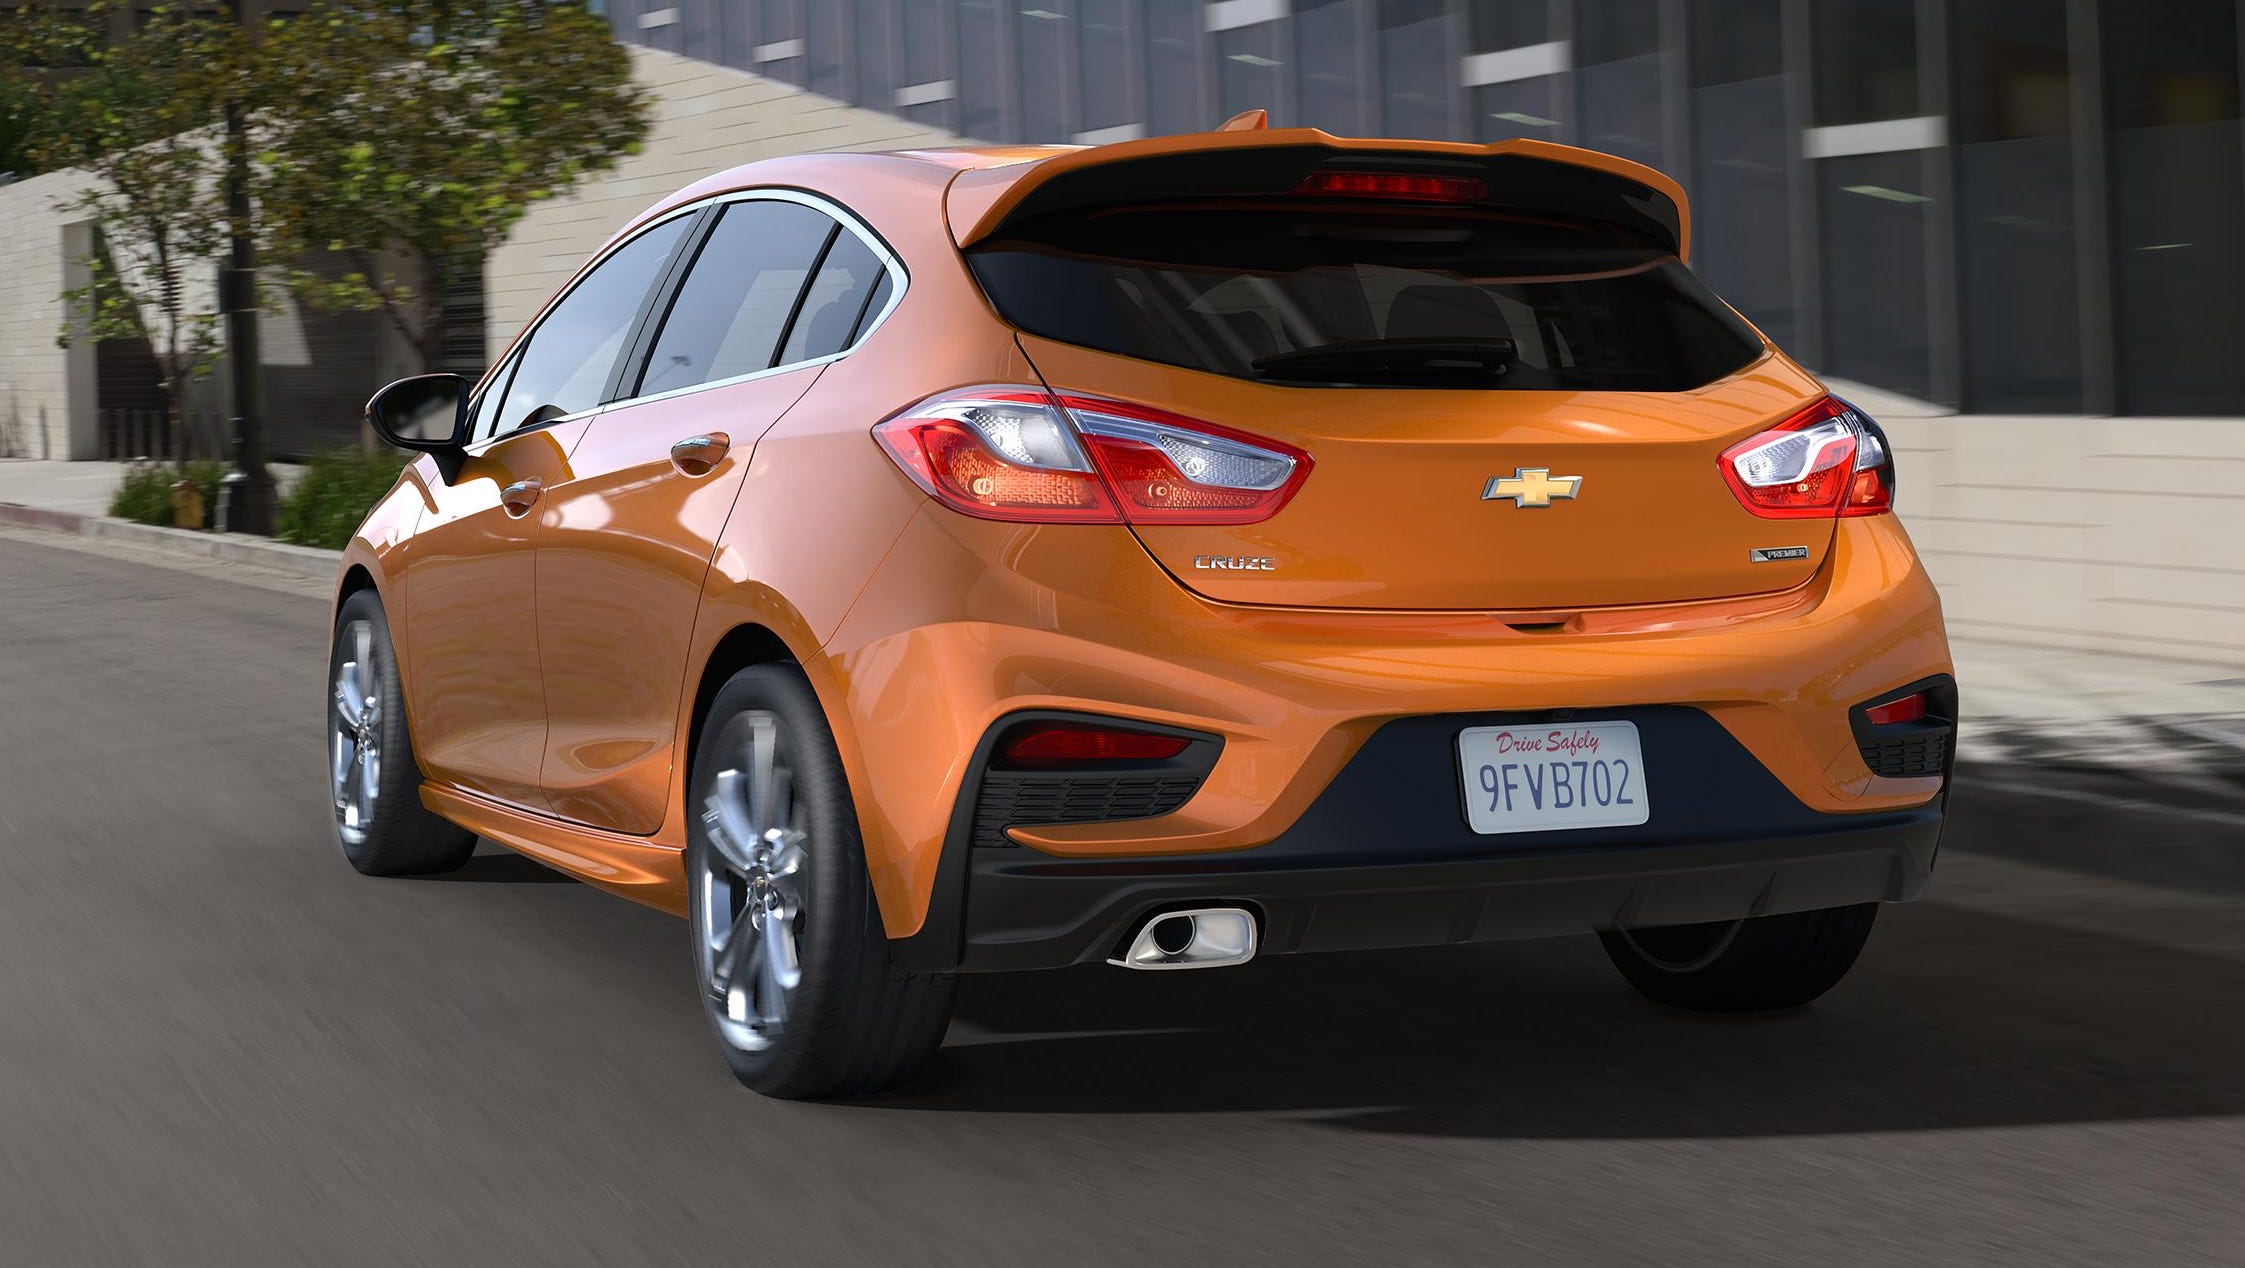 Chevy Cruze adds a door, and noticeable practicality